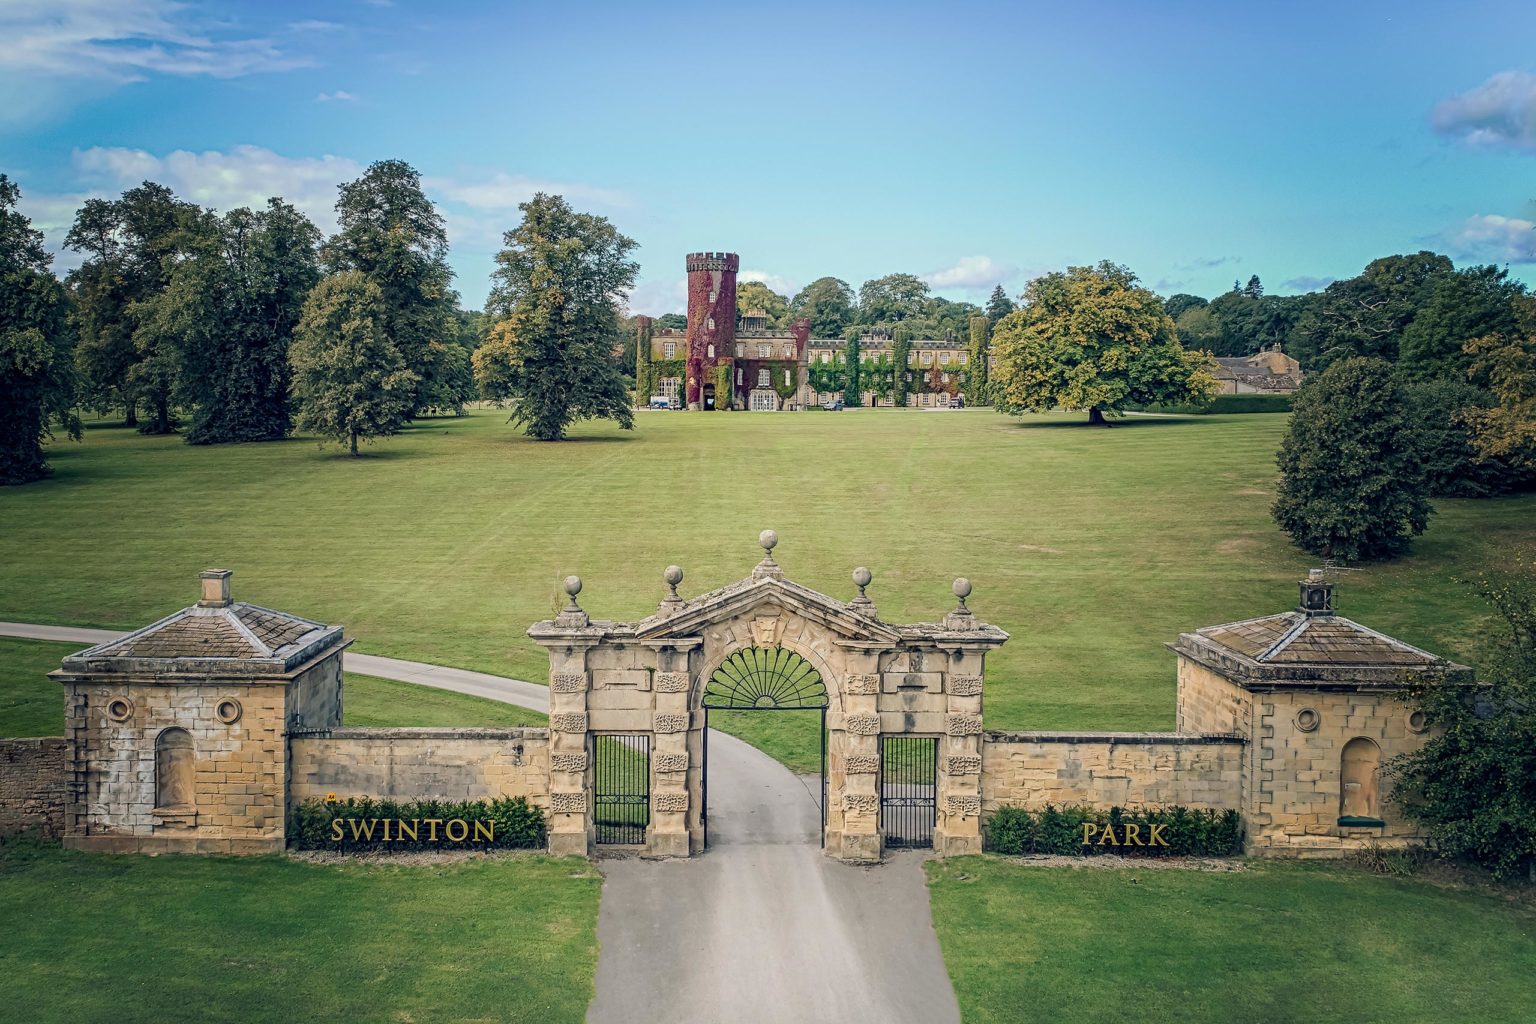 Exterior photo of Swinton Park luxury castle hotel and spa near Harrogate and the Yorkshire Dales, featuring the front grass lawn and helicopter pad area